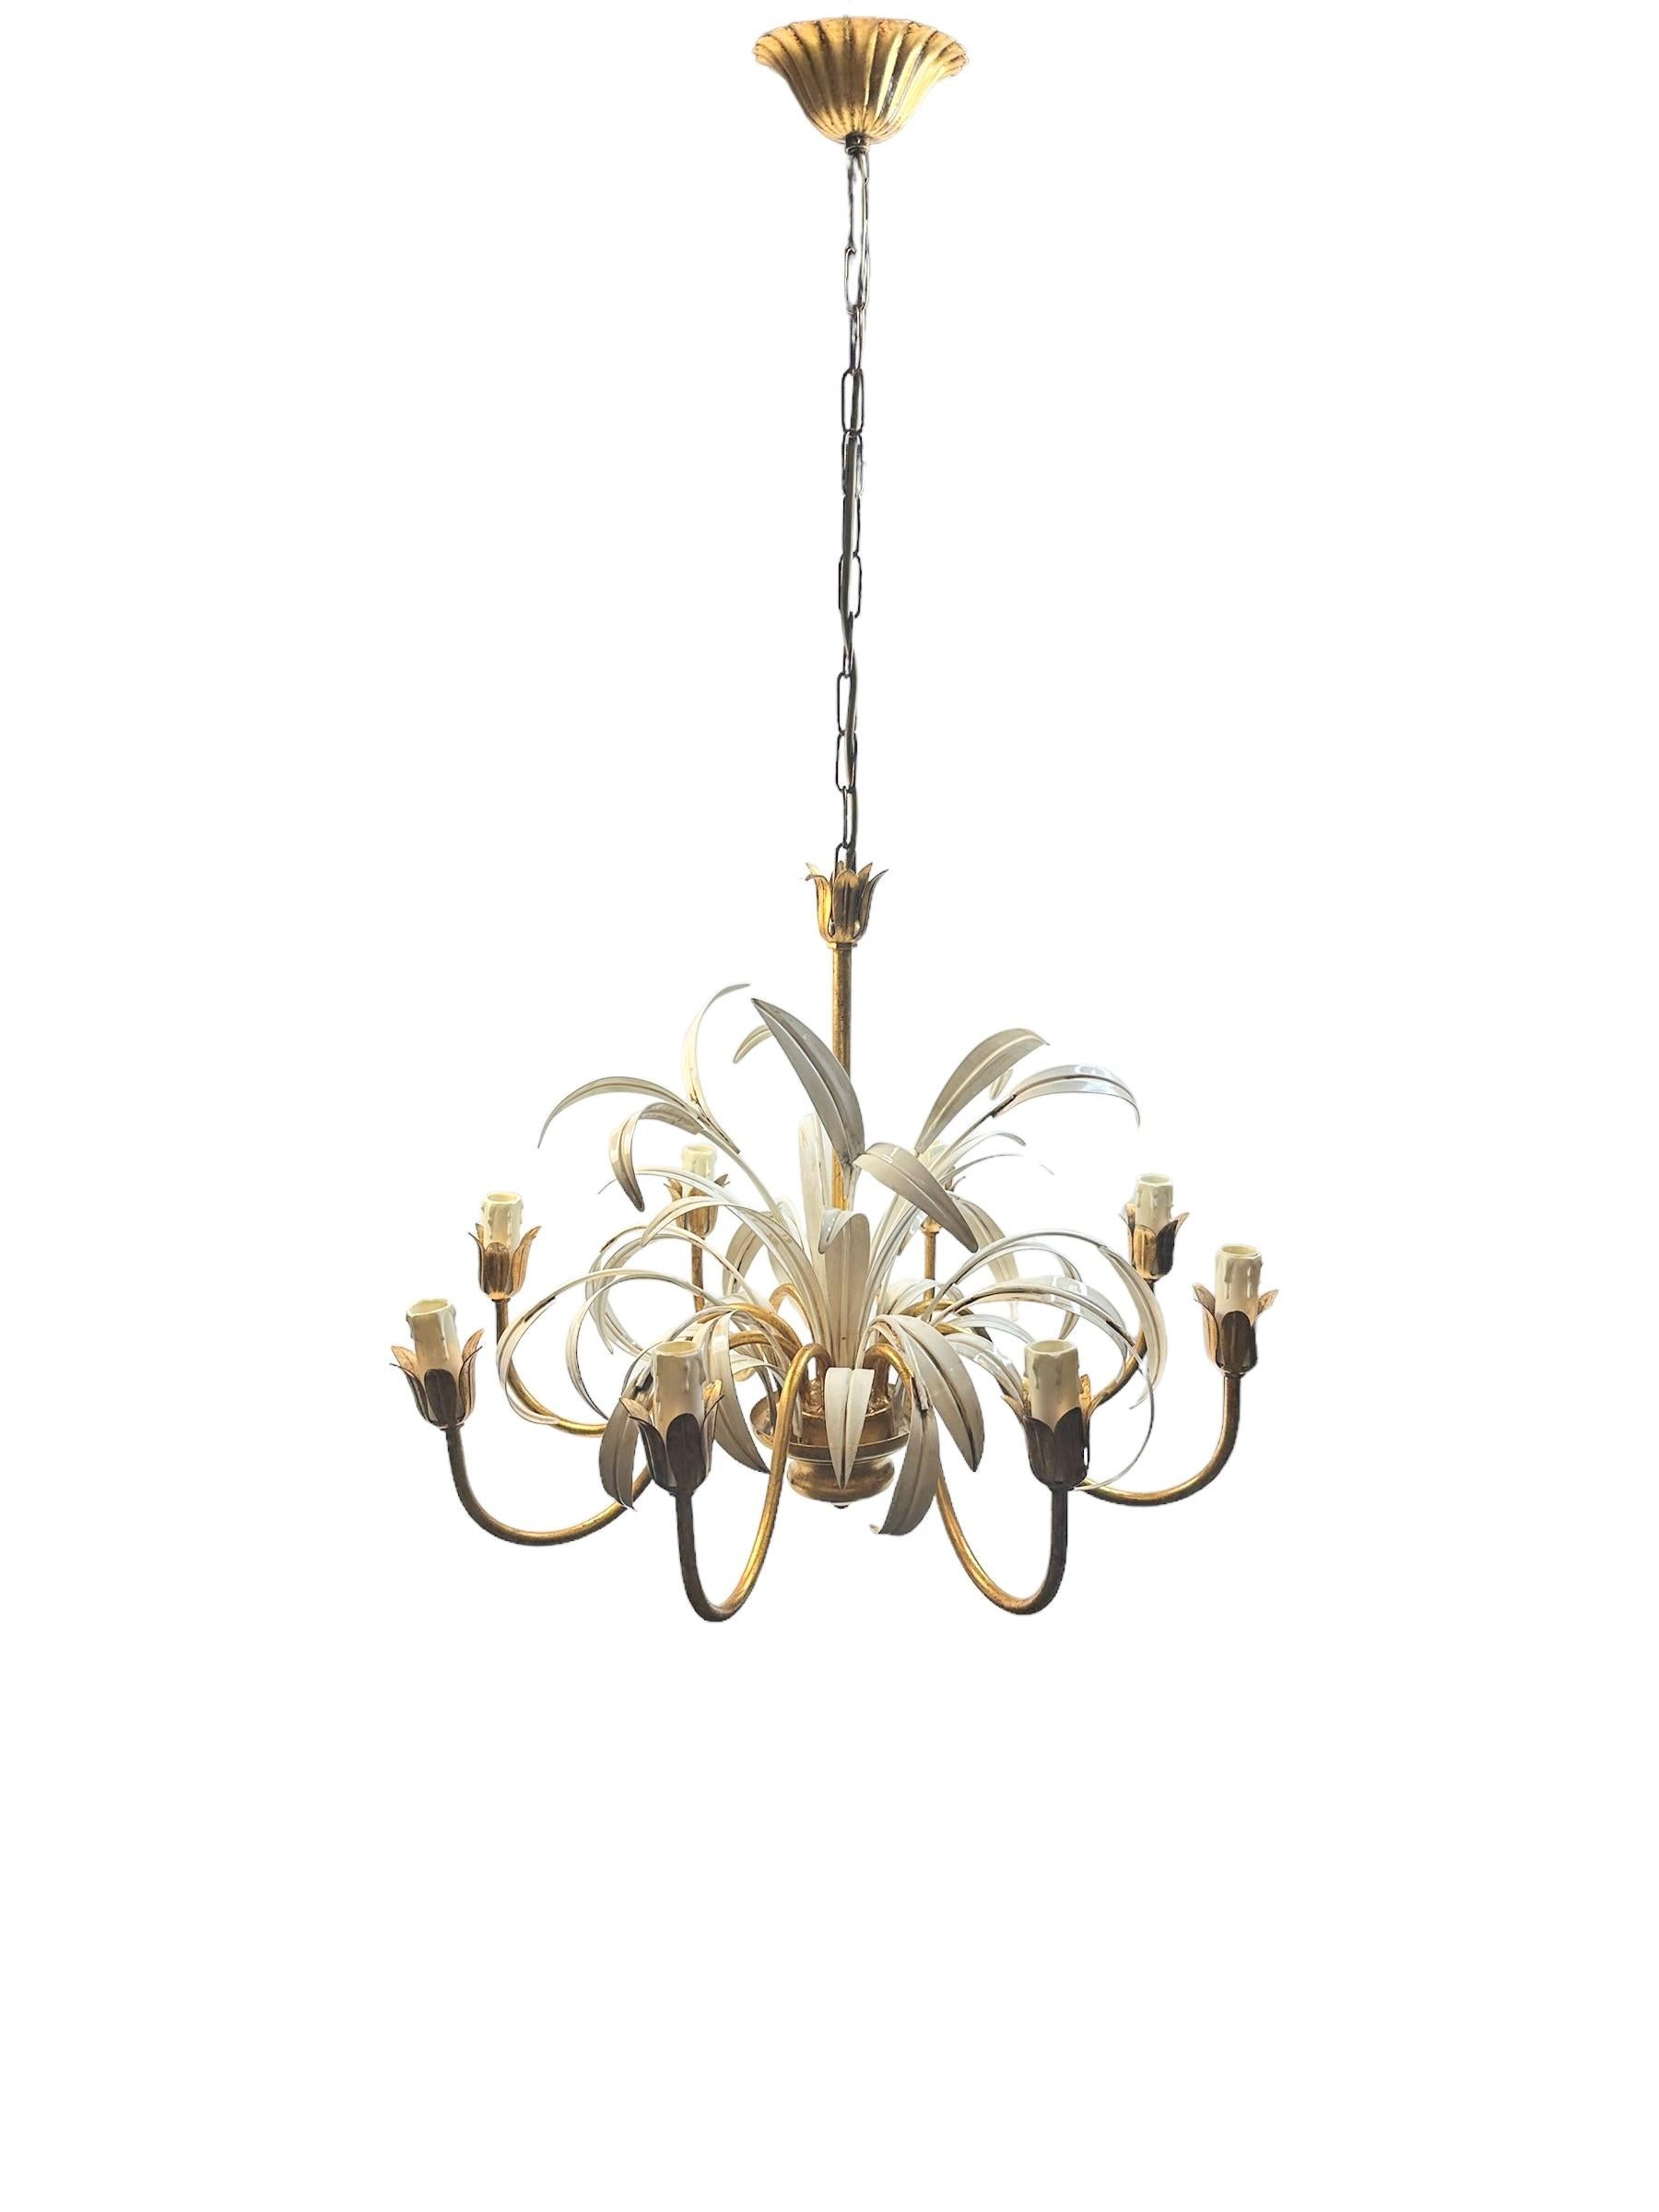 8-Light Gilt Metal Reed Leaf Chandelier Tole Toleware Coco Chanel Style, Italy For Sale 6